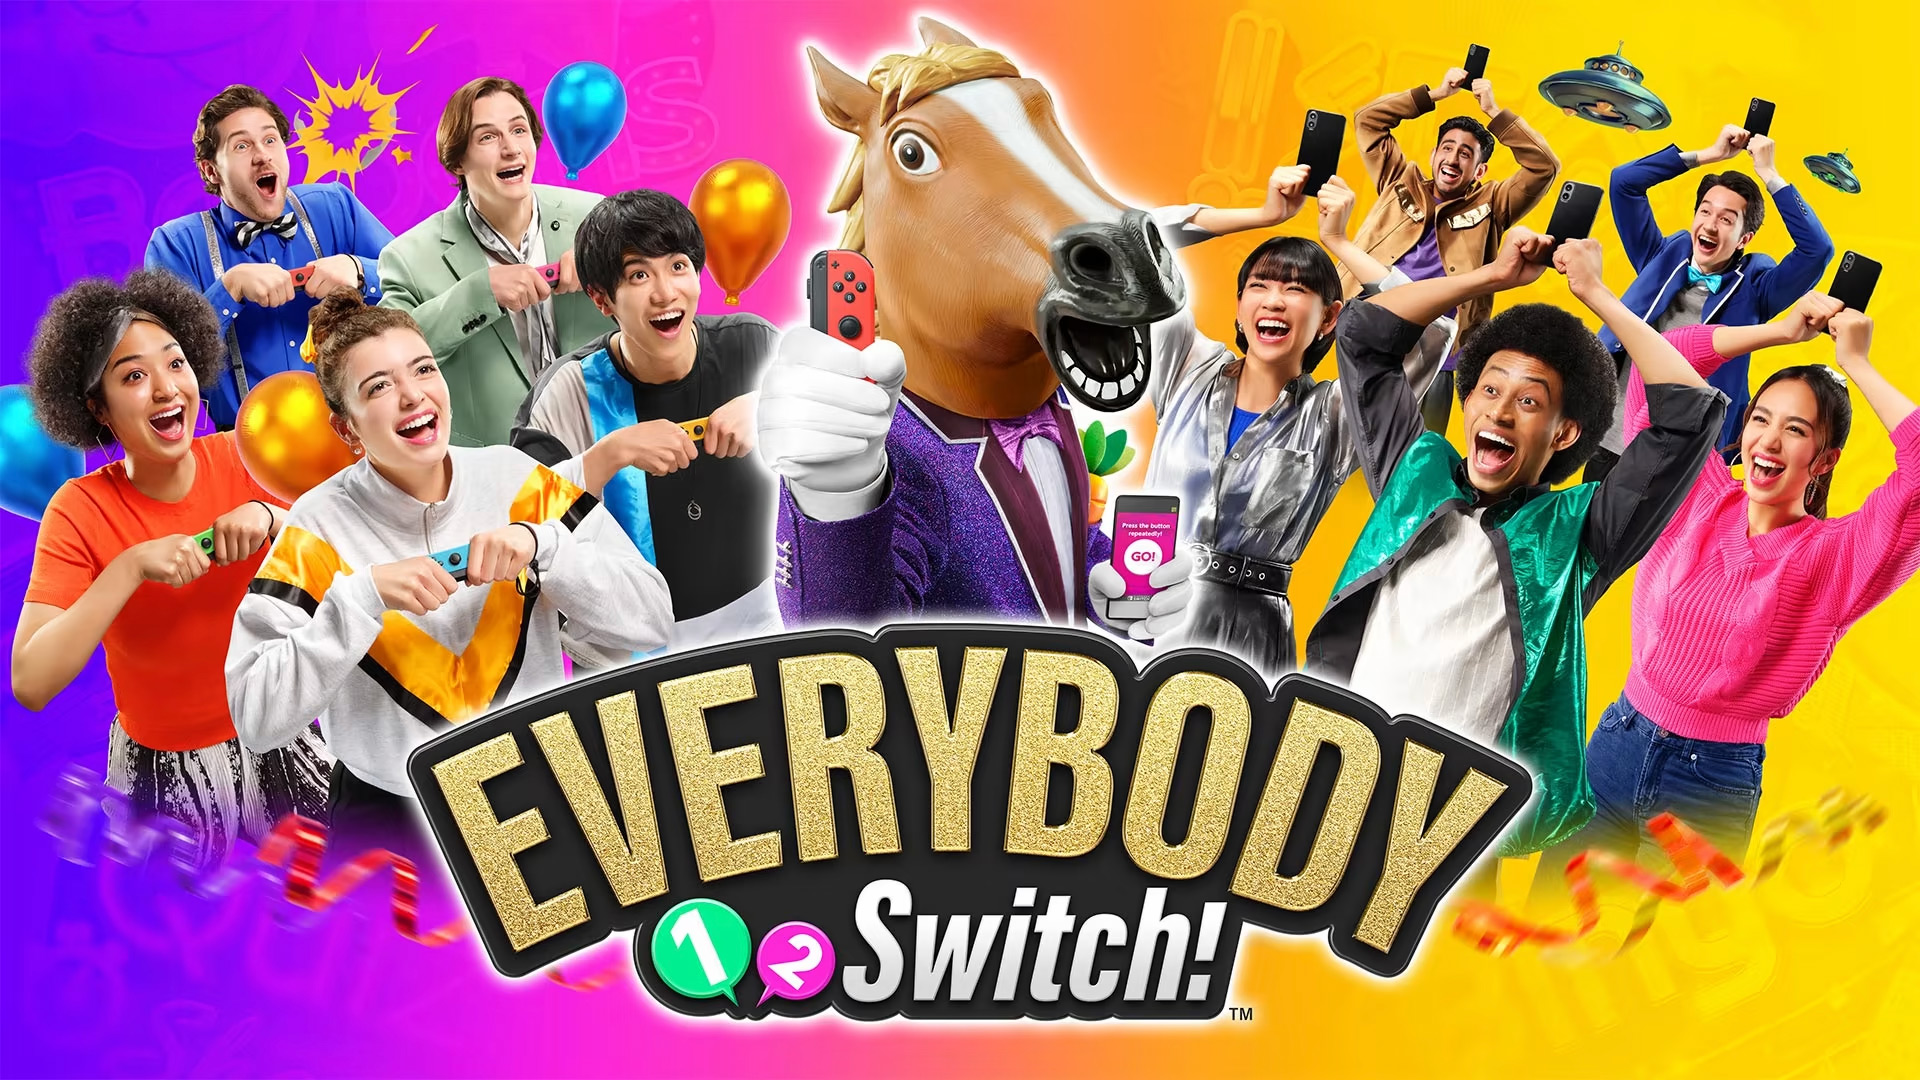 Everybody 1-2-Switch! has been announced by Nintendo